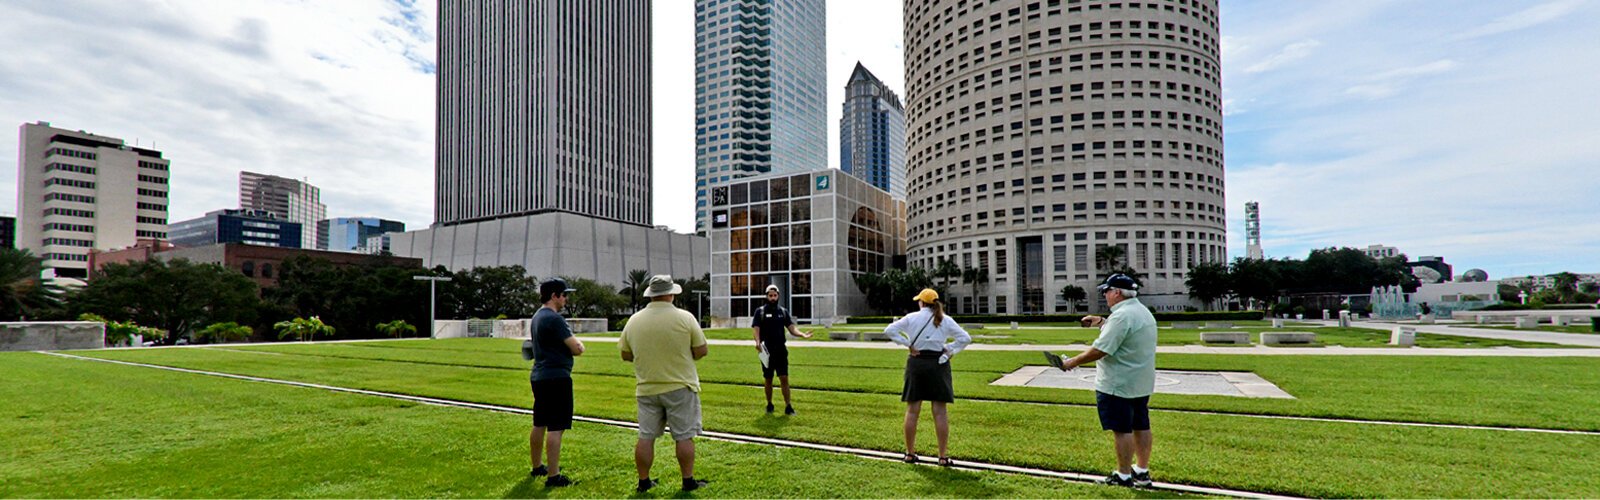 While preserving some of its historic buildings, Tampa embraces the future with modern architecture that gives, with its structures of various sizes, shapes and materials, an eclectic look to its cityscape.